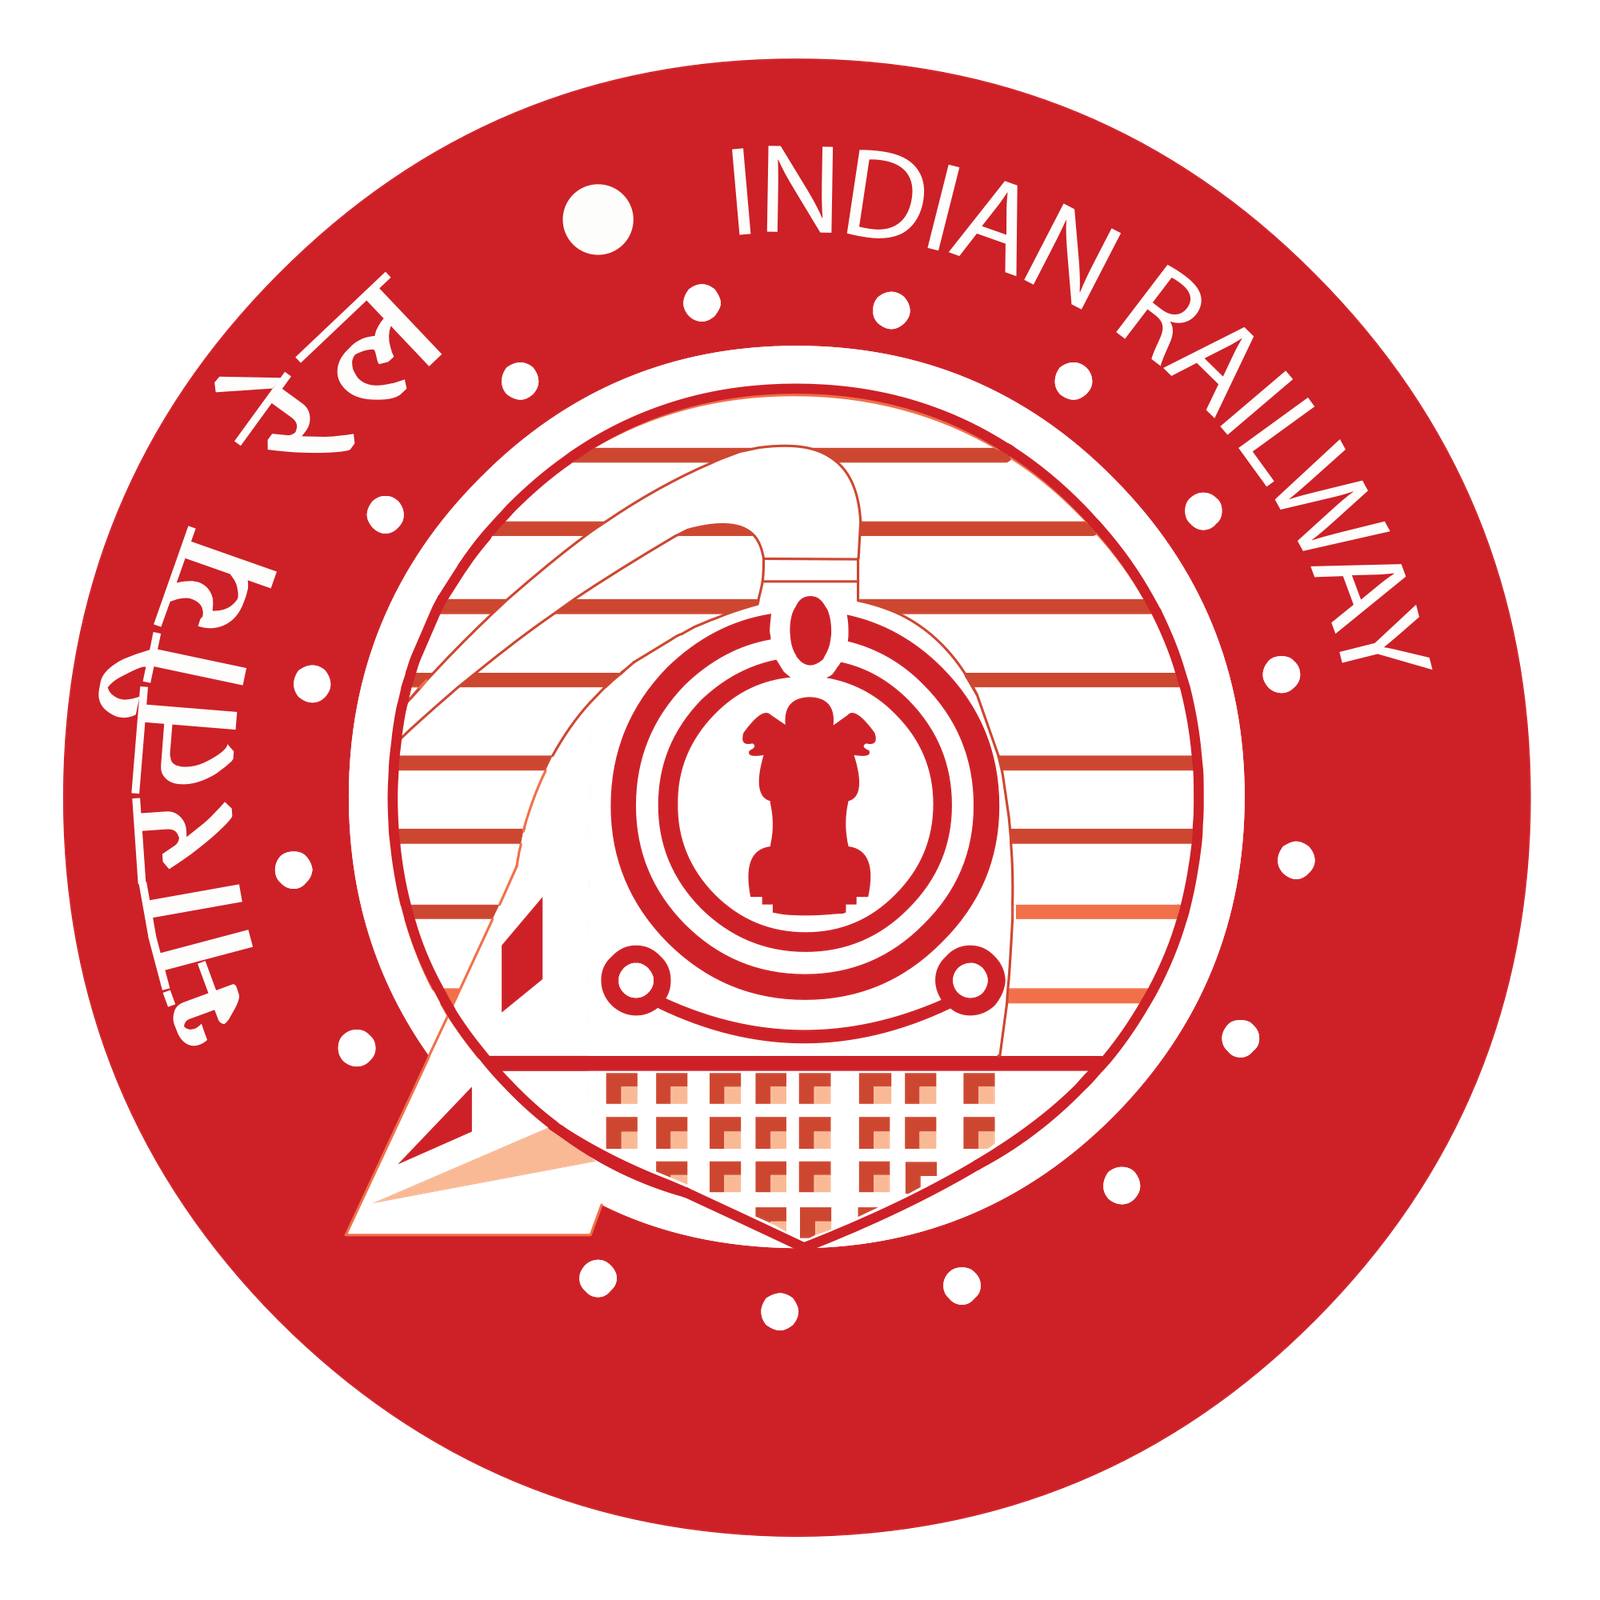 RRB(RAILWAY RECRUITMENT BOARD (GROU-D/ NTPC/ OTHERS)